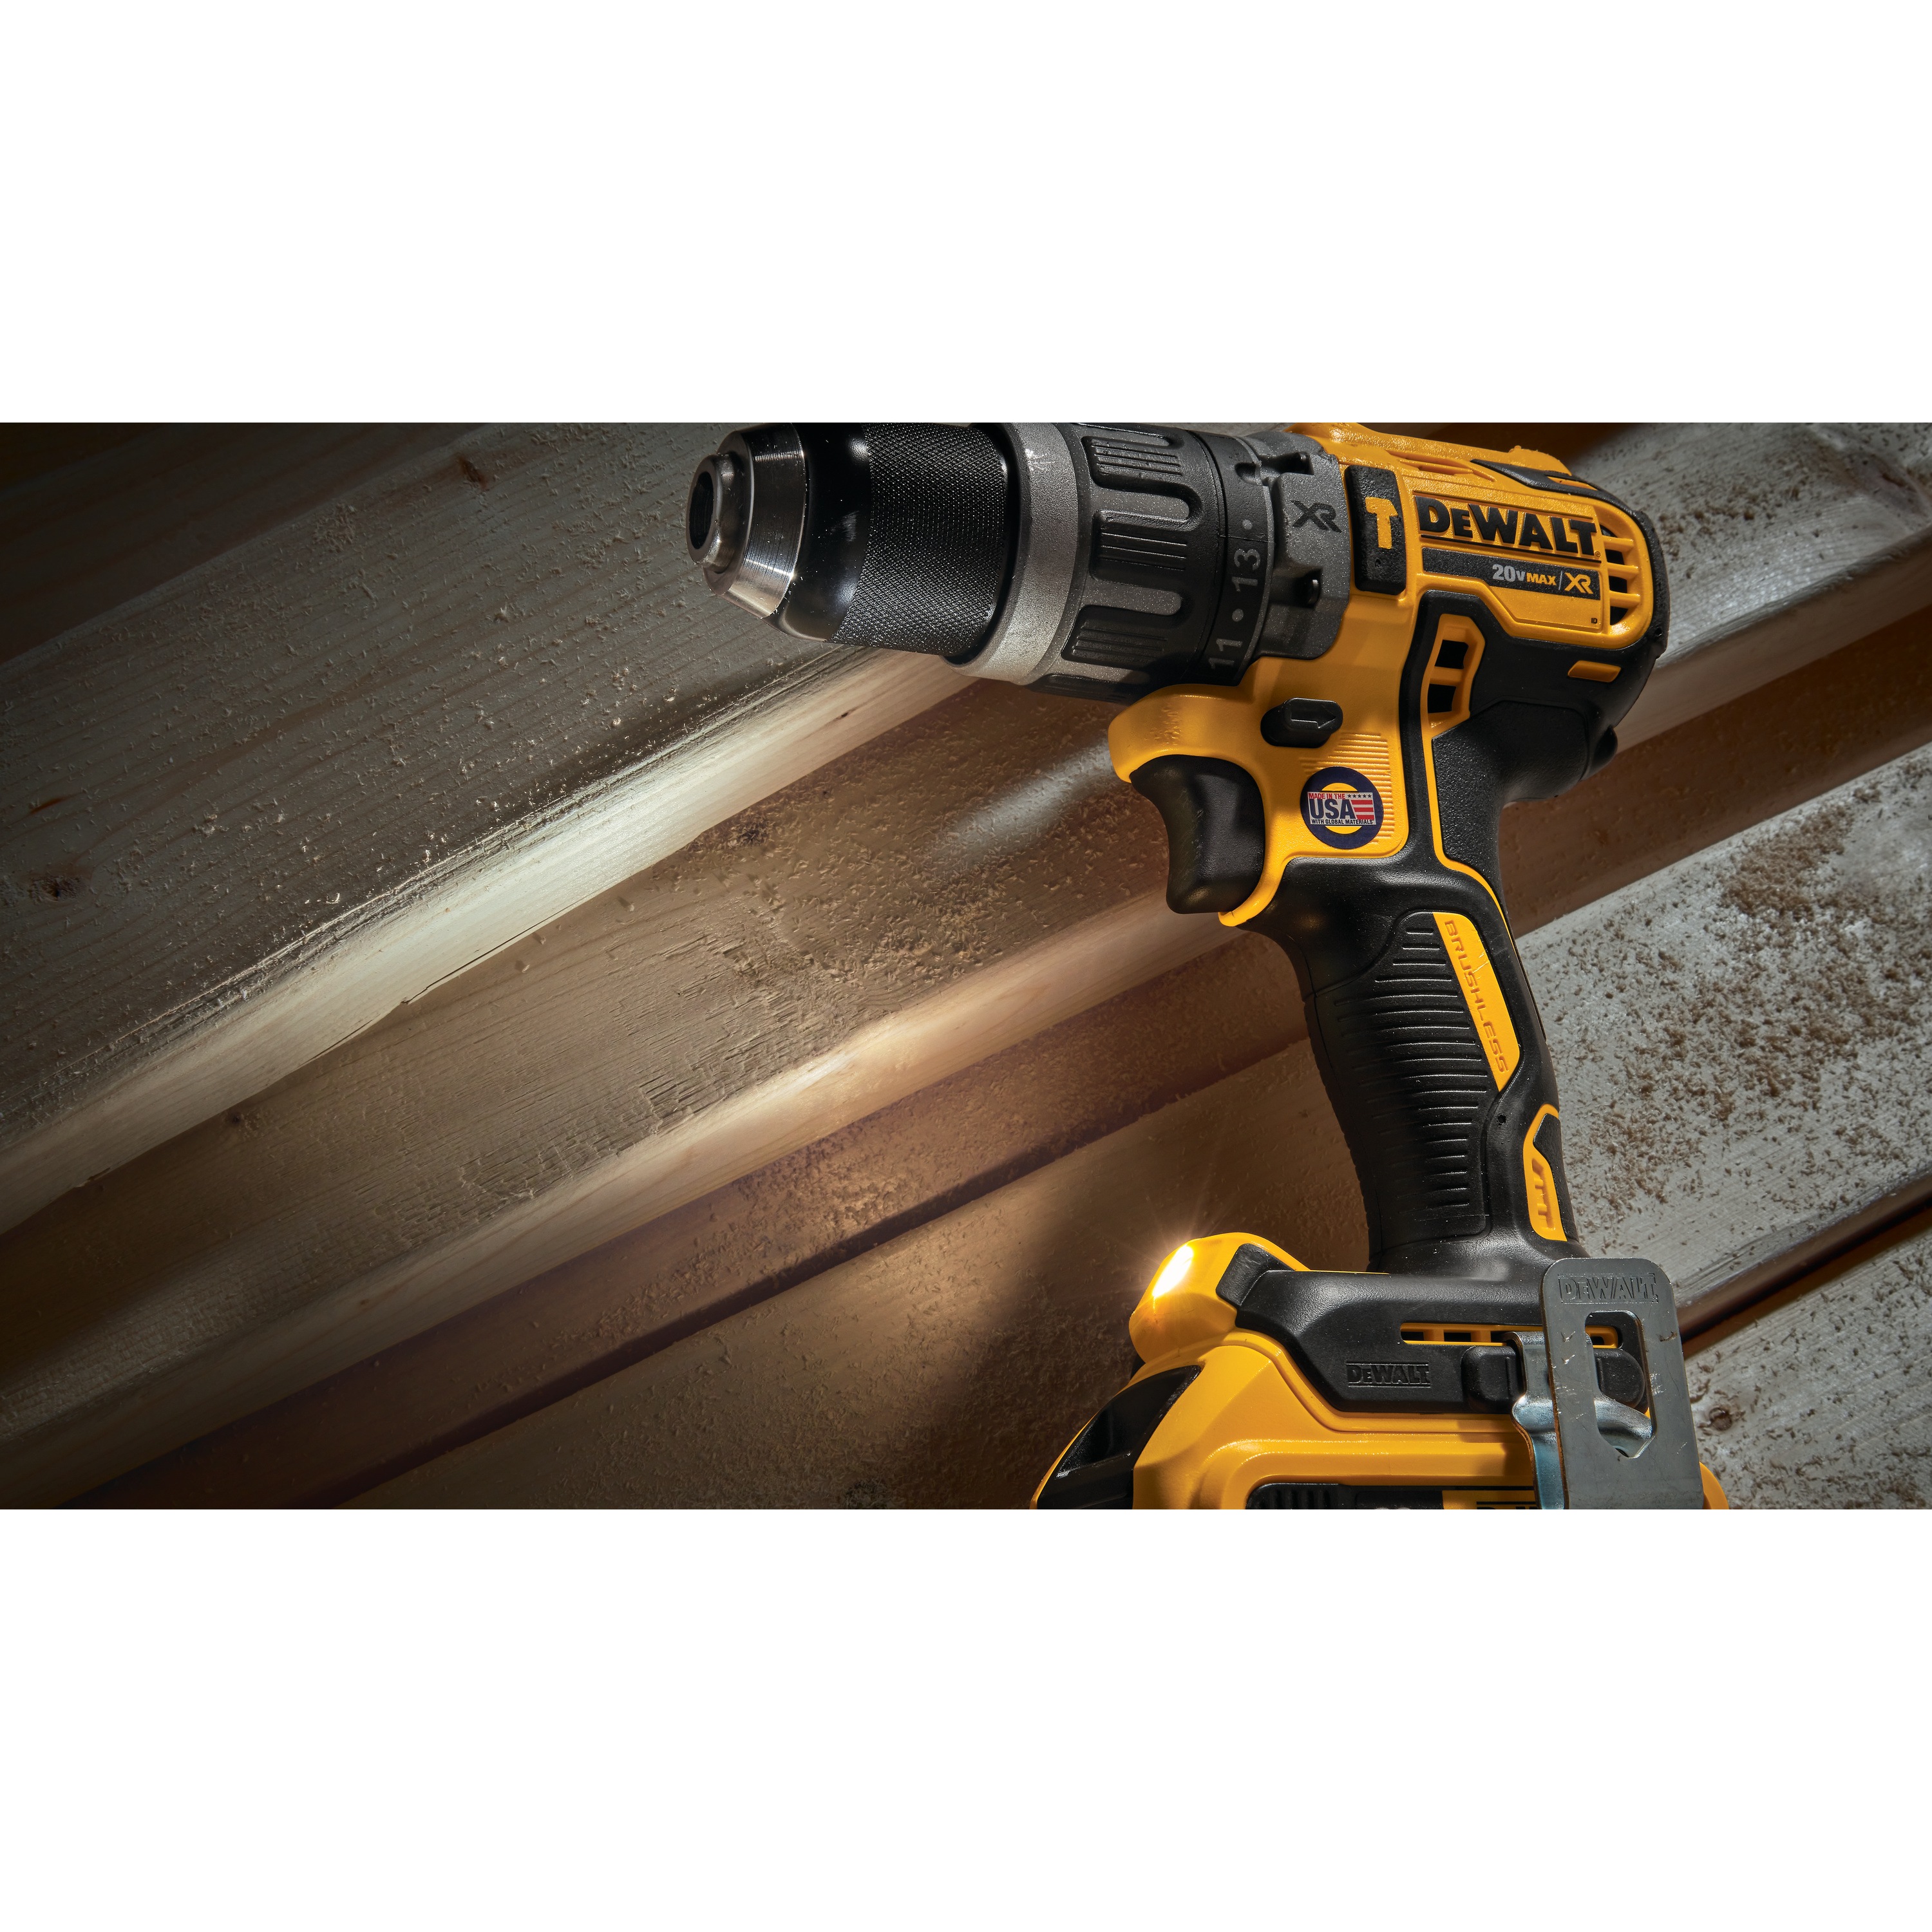 LED spotlight mode feature of XR Brushless Cordless Hammer drill driver.